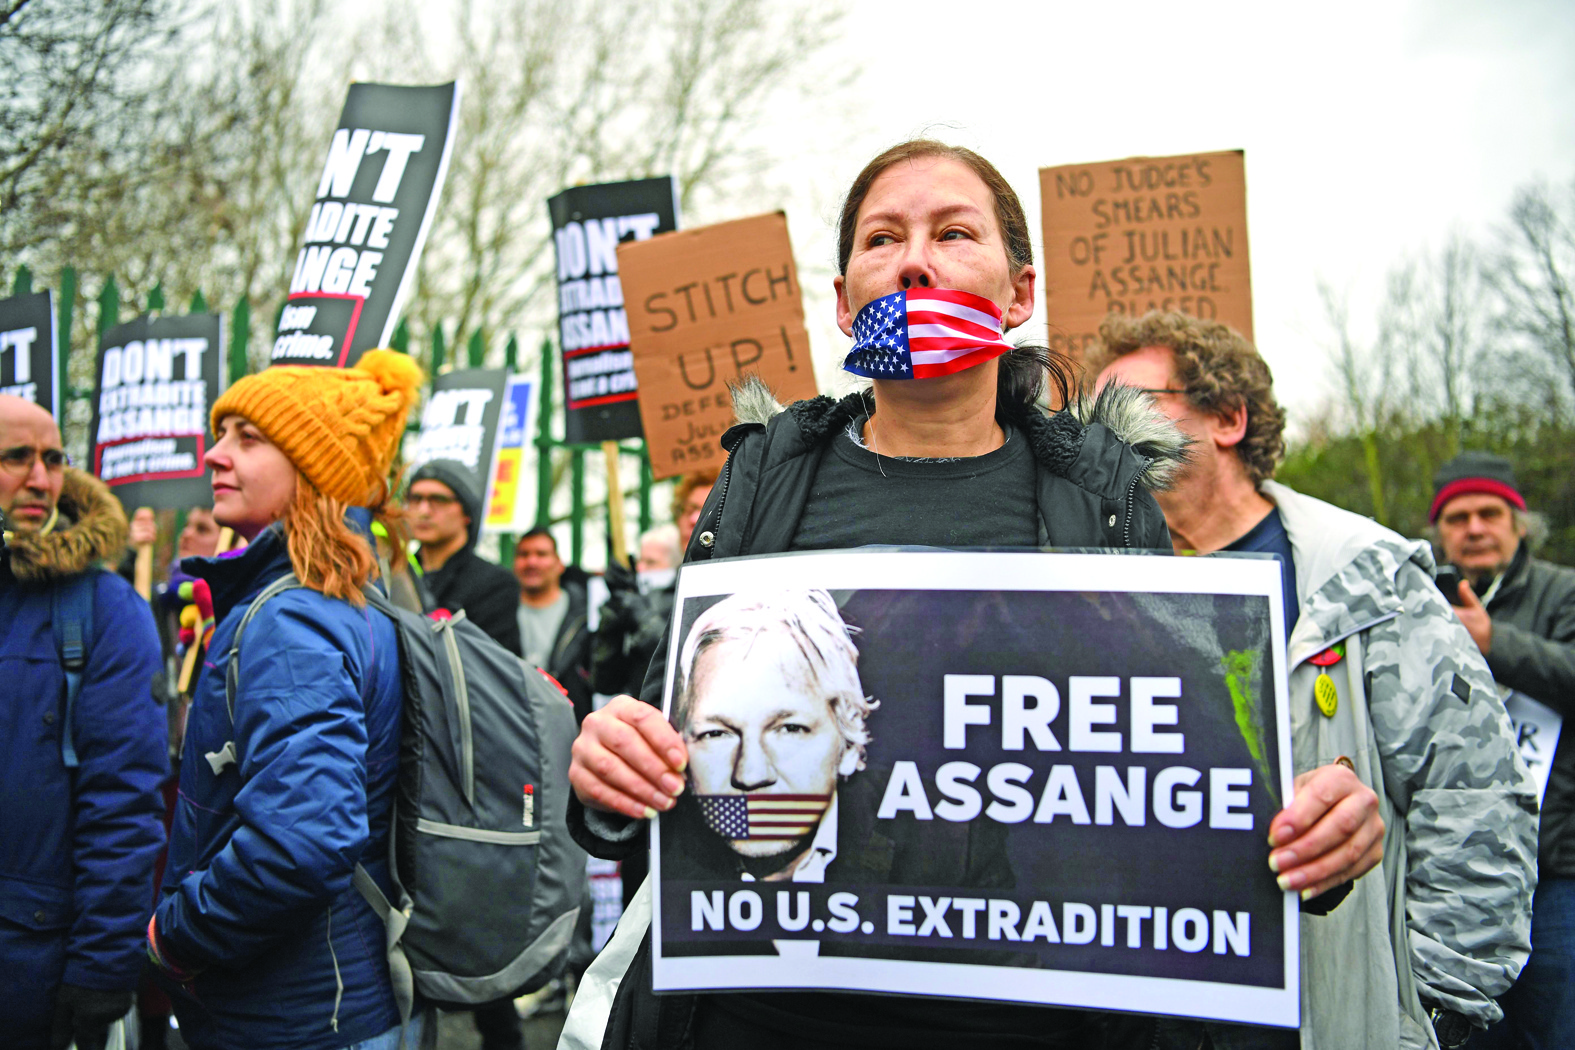 Supporters of WikiLeaks founder Julian Assange,hold placards calling for his freedom outside Woolwich Crown Court in southeast London on February 24, 2020, on the day of the opening of the full hearing into a US request for Assange's extradition. - A British court on February 24 starts hearing Washington's extradition request for WikiLeaks founder Julian Assange in a test case of media freedoms in the digital age and the global limits of US justice. (Photo by DANIEL LEAL-OLIVAS / AFP)